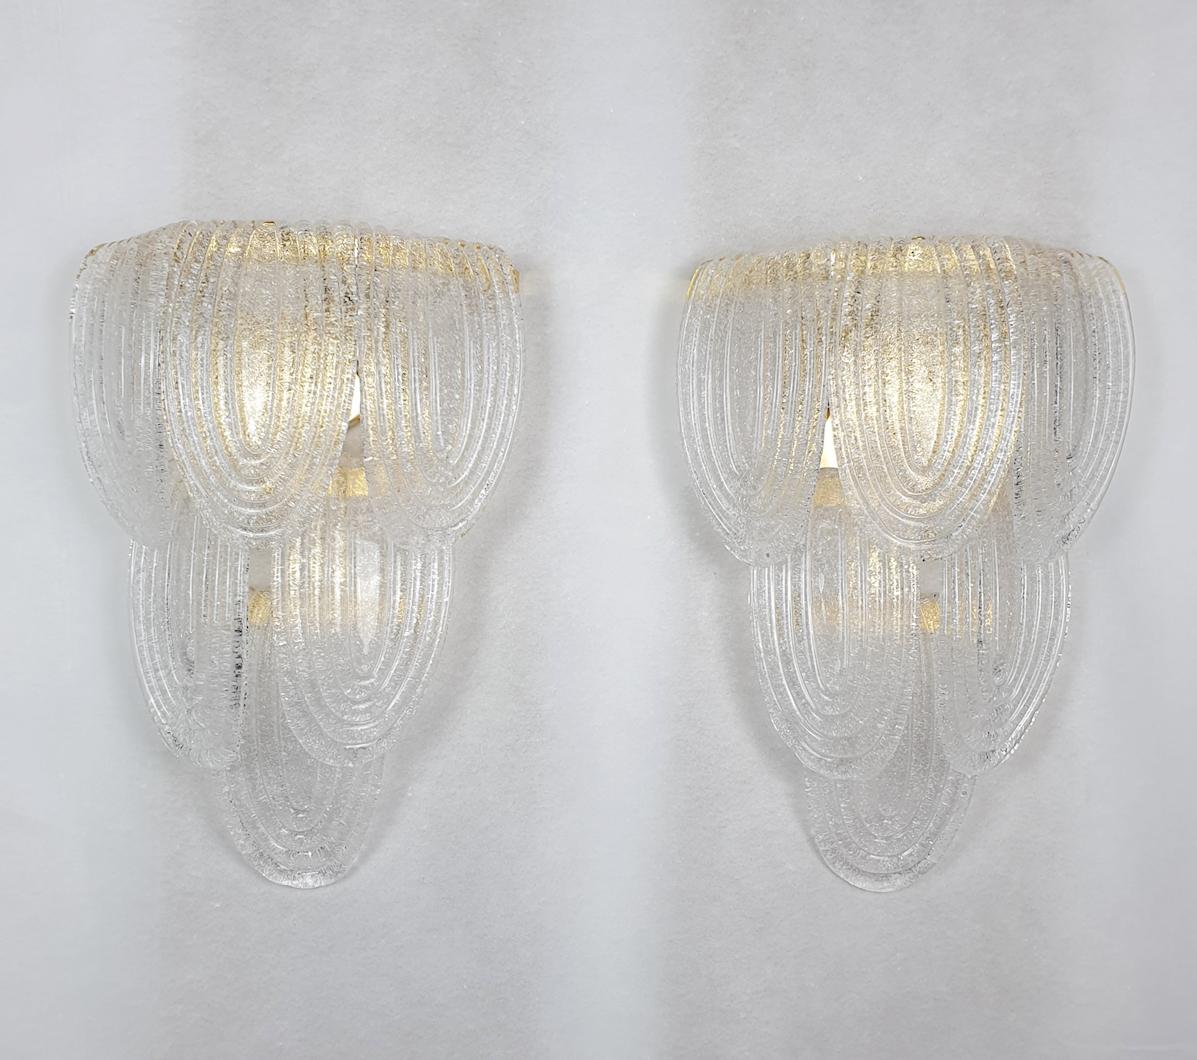 Pair of Mid-Century Modern Murano glass wall sconces, by Mazzega, Italy, 1970s.
The vintage pair of sconces is made of clear & textured Murano glass and gold plated frame.
Matching chandelier available.
Each sconces has 3 lights, and is rewired for